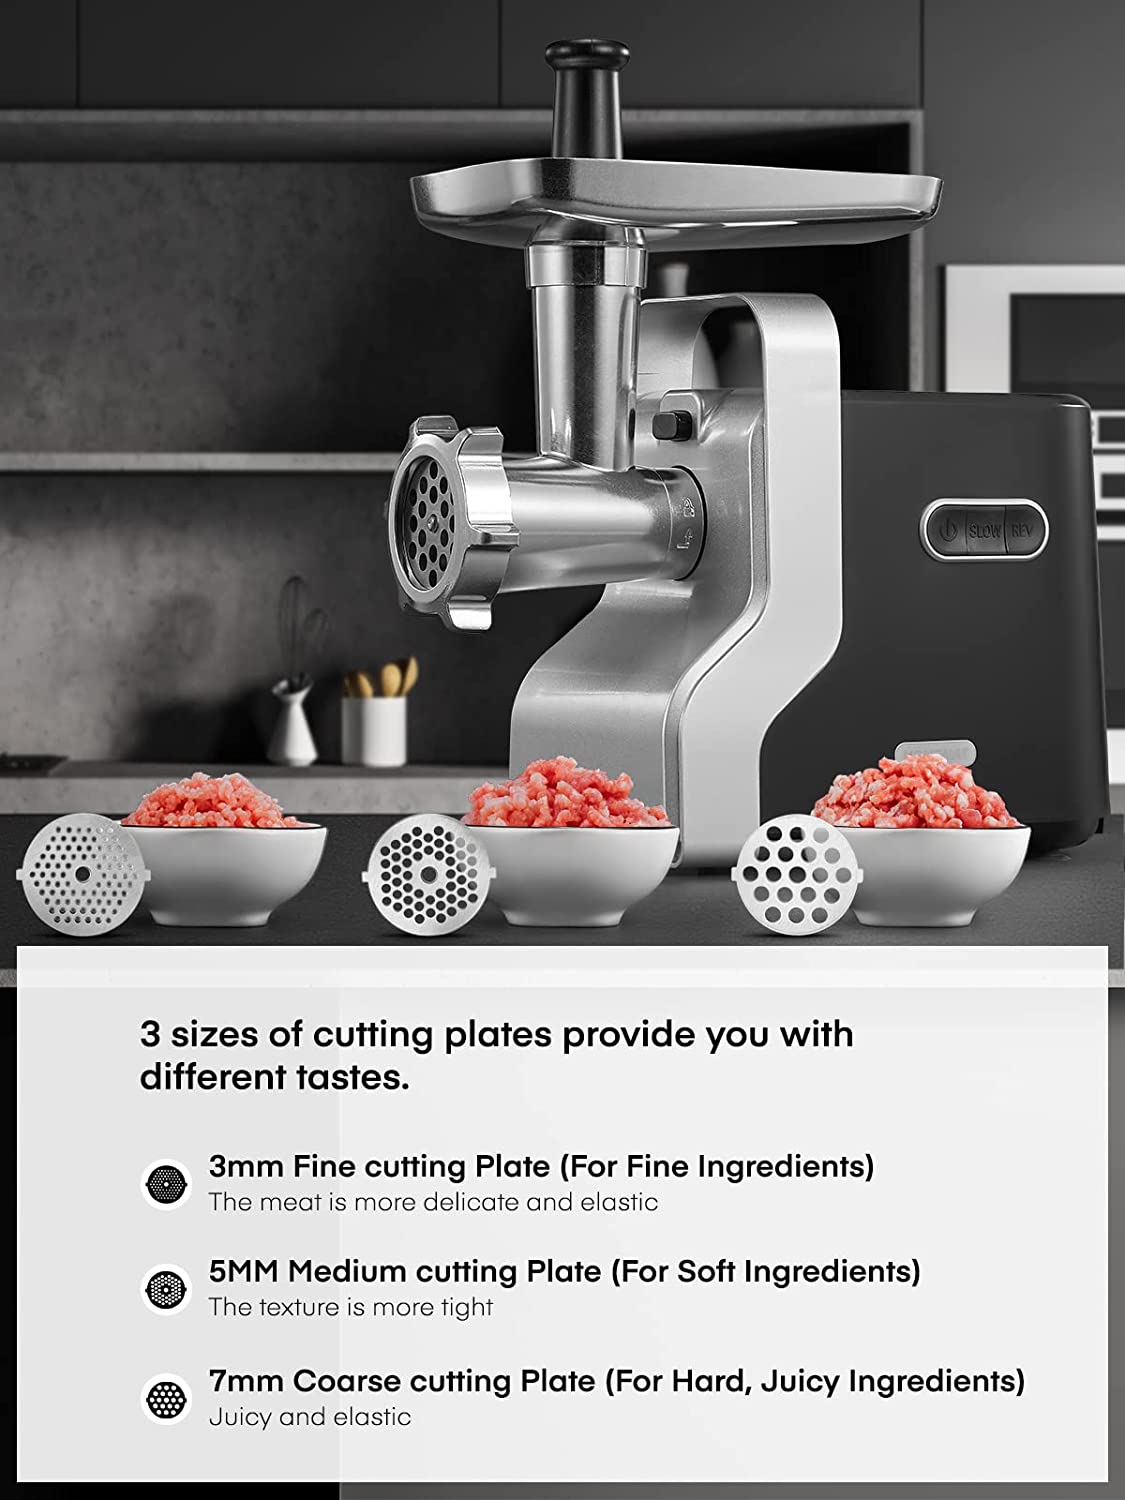 3 sizes of cutting plates provide you with different tastes, Heavy Duty Electric Meat Grinder, 2500W Max Ultra Powerful, 5 in 1 HOUSNAT Multifunction Food Grinder, Sausage Stuffer, Slicer/Shredder/Grater, Kubbe & Tomato Juicing Kits, Home Kitchen Use